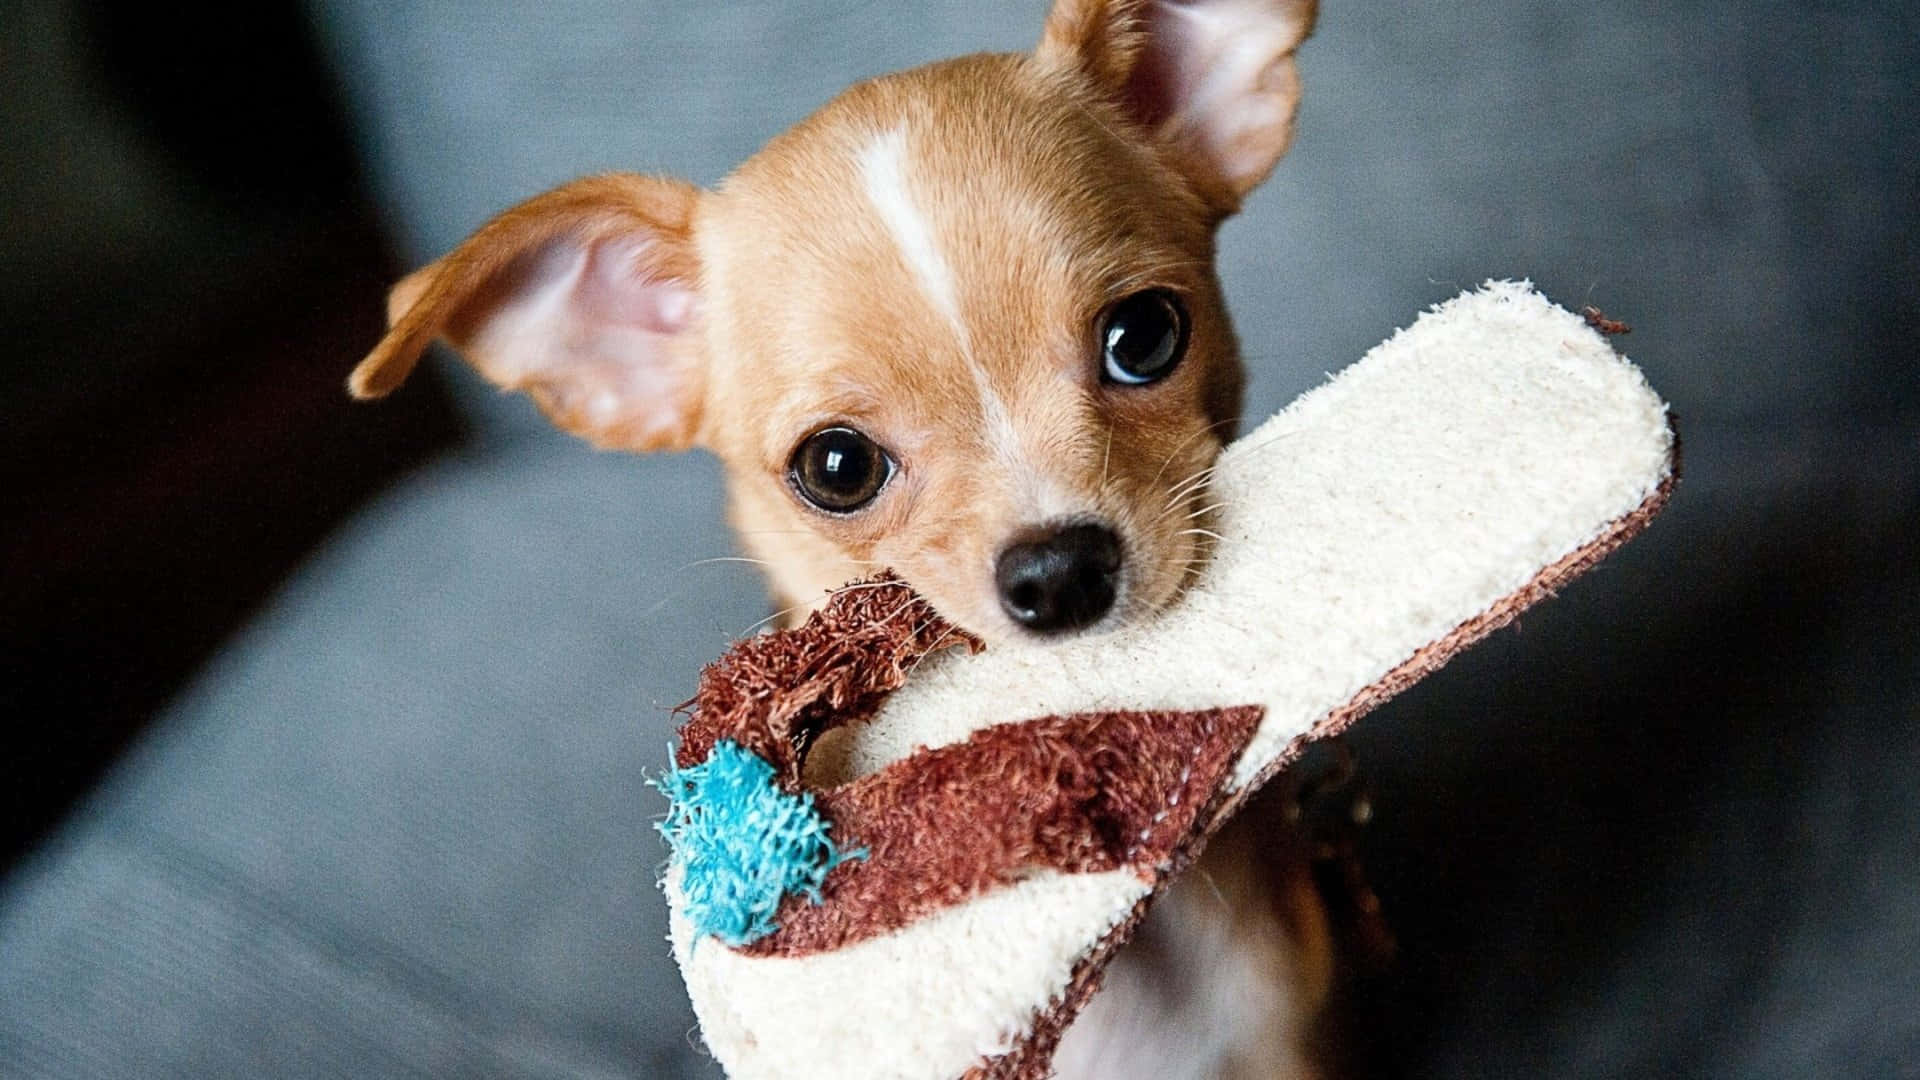 A cute Chihuahua looking up with tag along ears